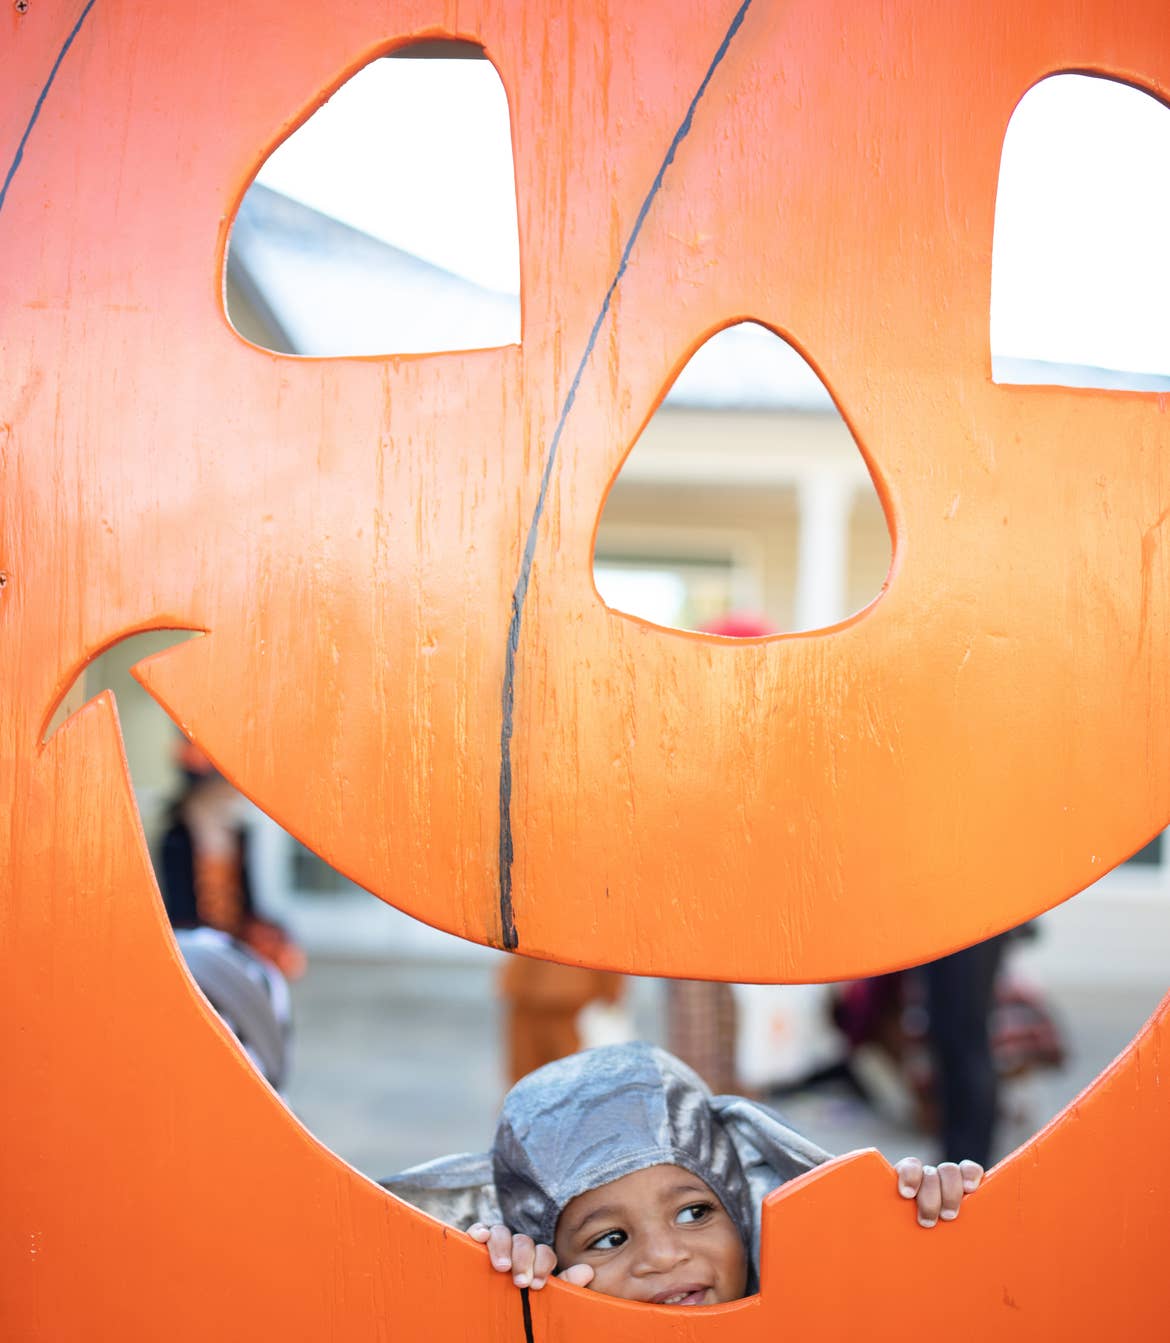 Tina's son in costume peeking through a giant pumpkin cut-out decoration at Falladays at Villages Resort.